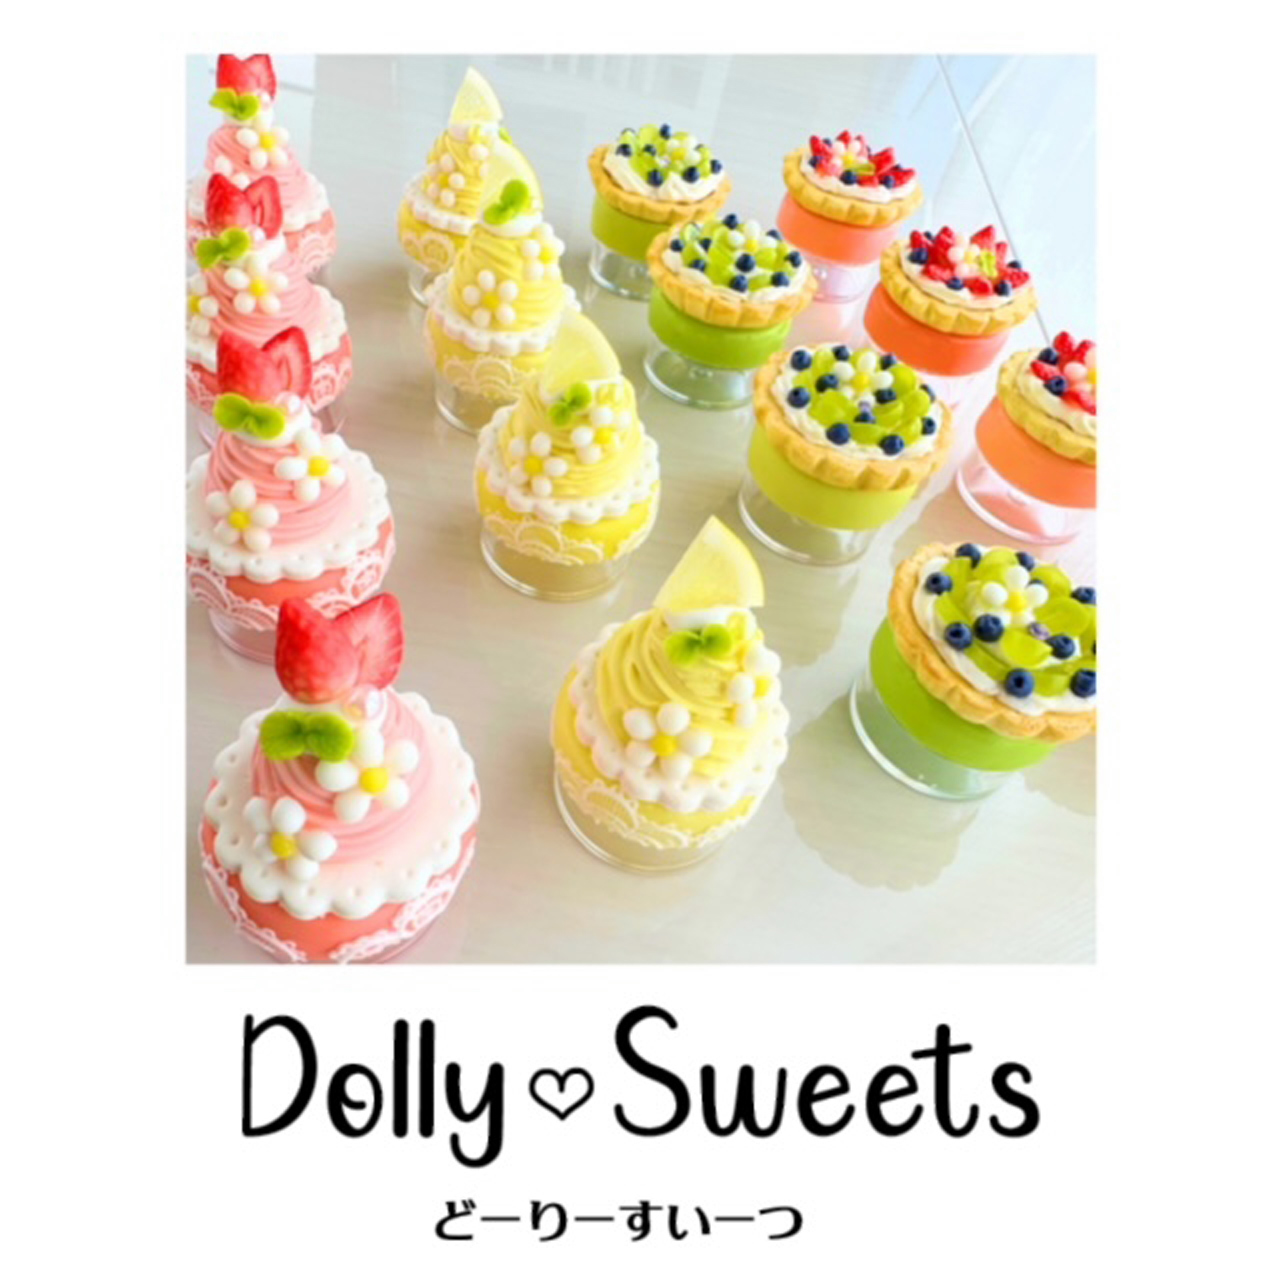 Dolly♡Sweets - ドーリースイーツ